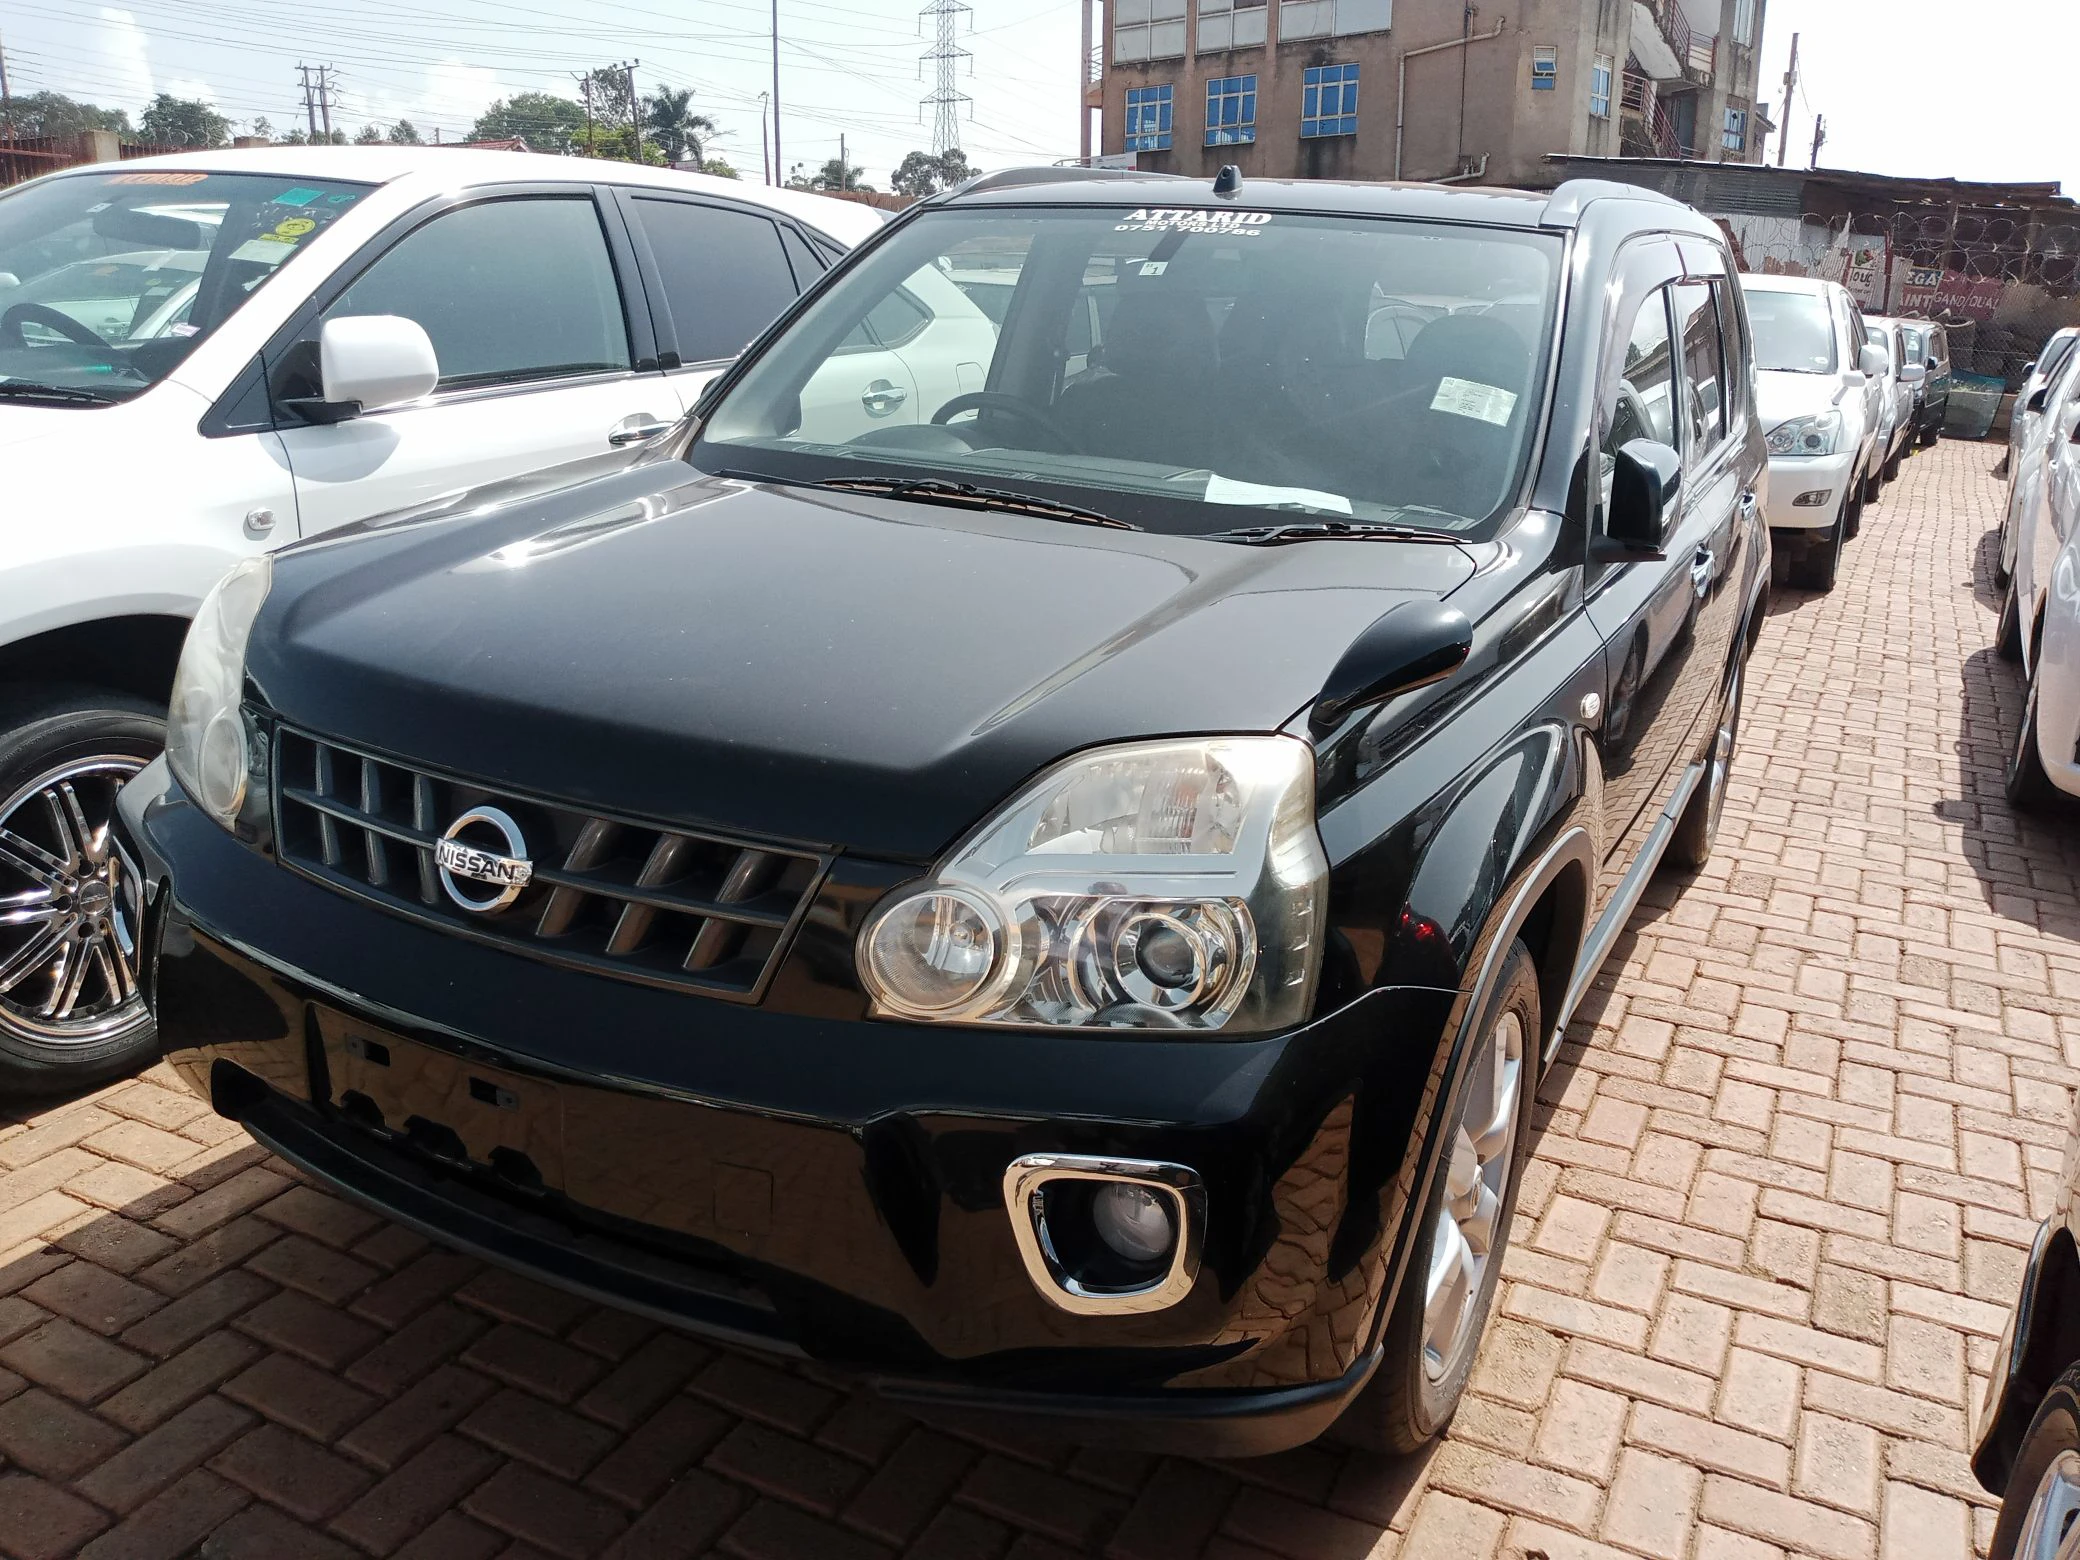 Nissan X-Trail 2008 Price, Features, Images  Specs